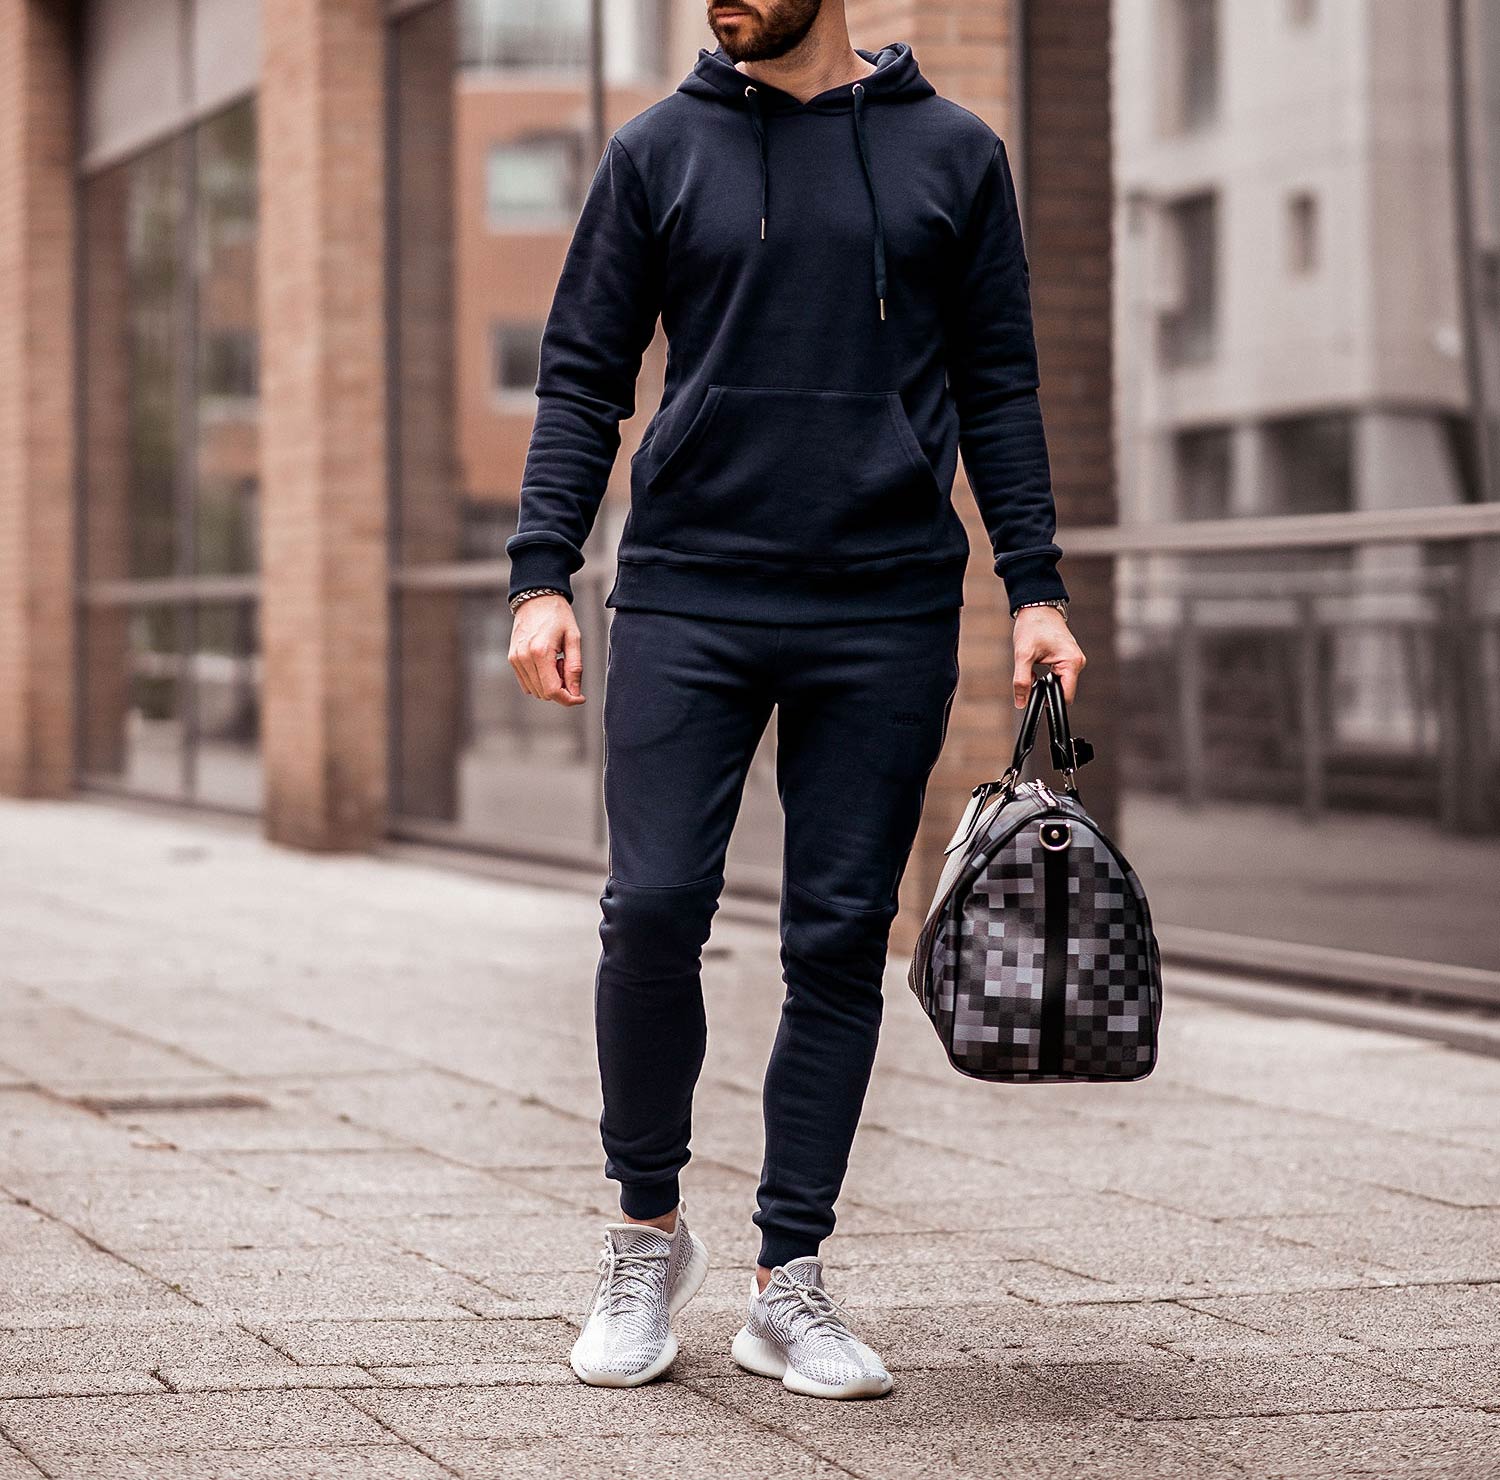 The Ultimate Guide to Stylish and Functional Men's Gym Outfits